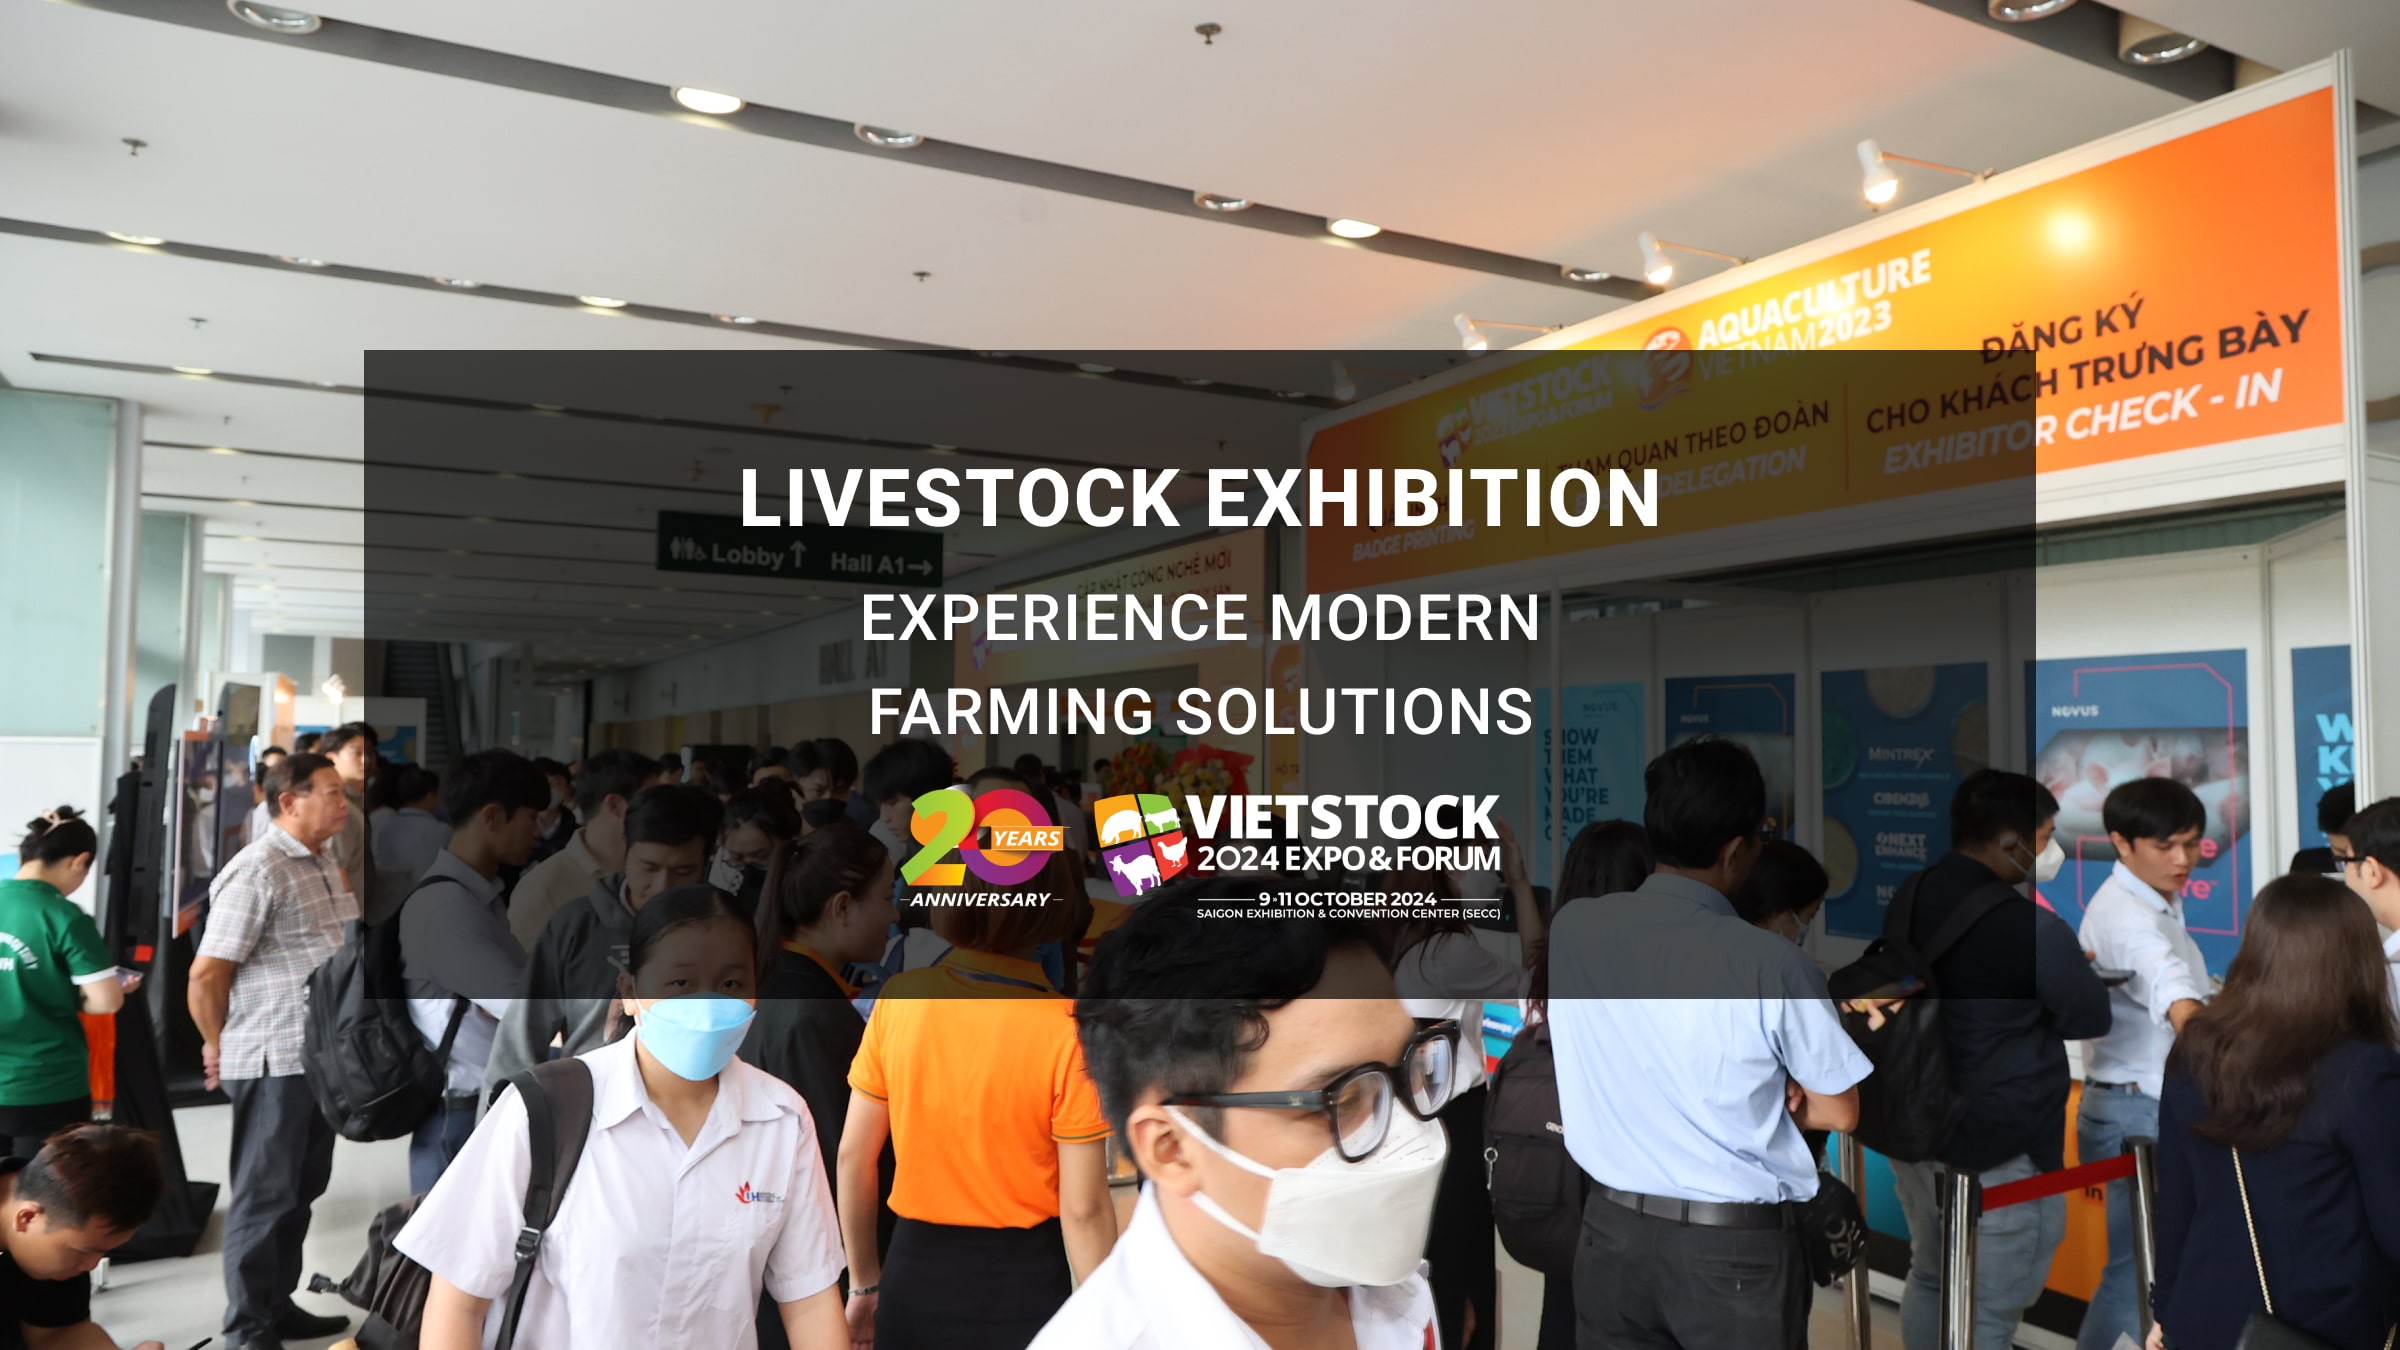 LIVESTOCK EXHIBITION: EXPERIENCE MODERN FARMING SOLUTIONS